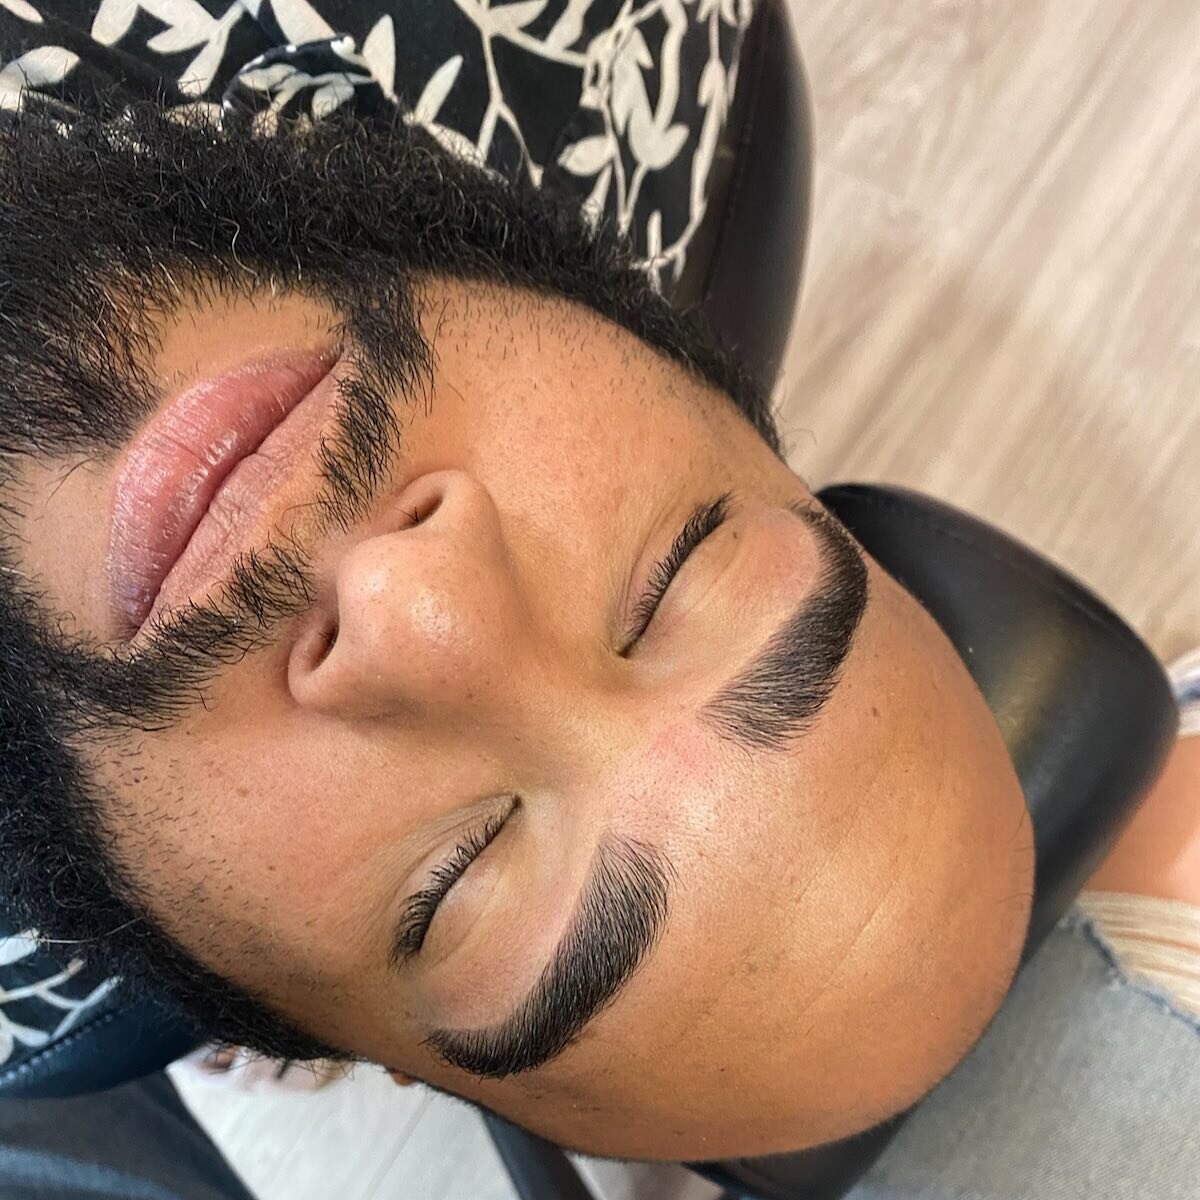 Men&rsquo;s brow cleanup, ✨ tweeze only 😳 Come see us ladies &amp; gents! ⁣⁣
⁣&bull;⁣
&bull;⁣
&bull;⁣
&bull;⁣
&bull;⁣
&bull;⁣
&bull;⁣
&bull;⁣
&bull;⁣
⁣Brows by Emily⁣⁣
⁣⁣
⁣⁣
⁣⁣
⁣⁣
⁣⁣
#mensbrows #meneyebrows #tulsamenbrows #tulsamen #tulsabrows #mens